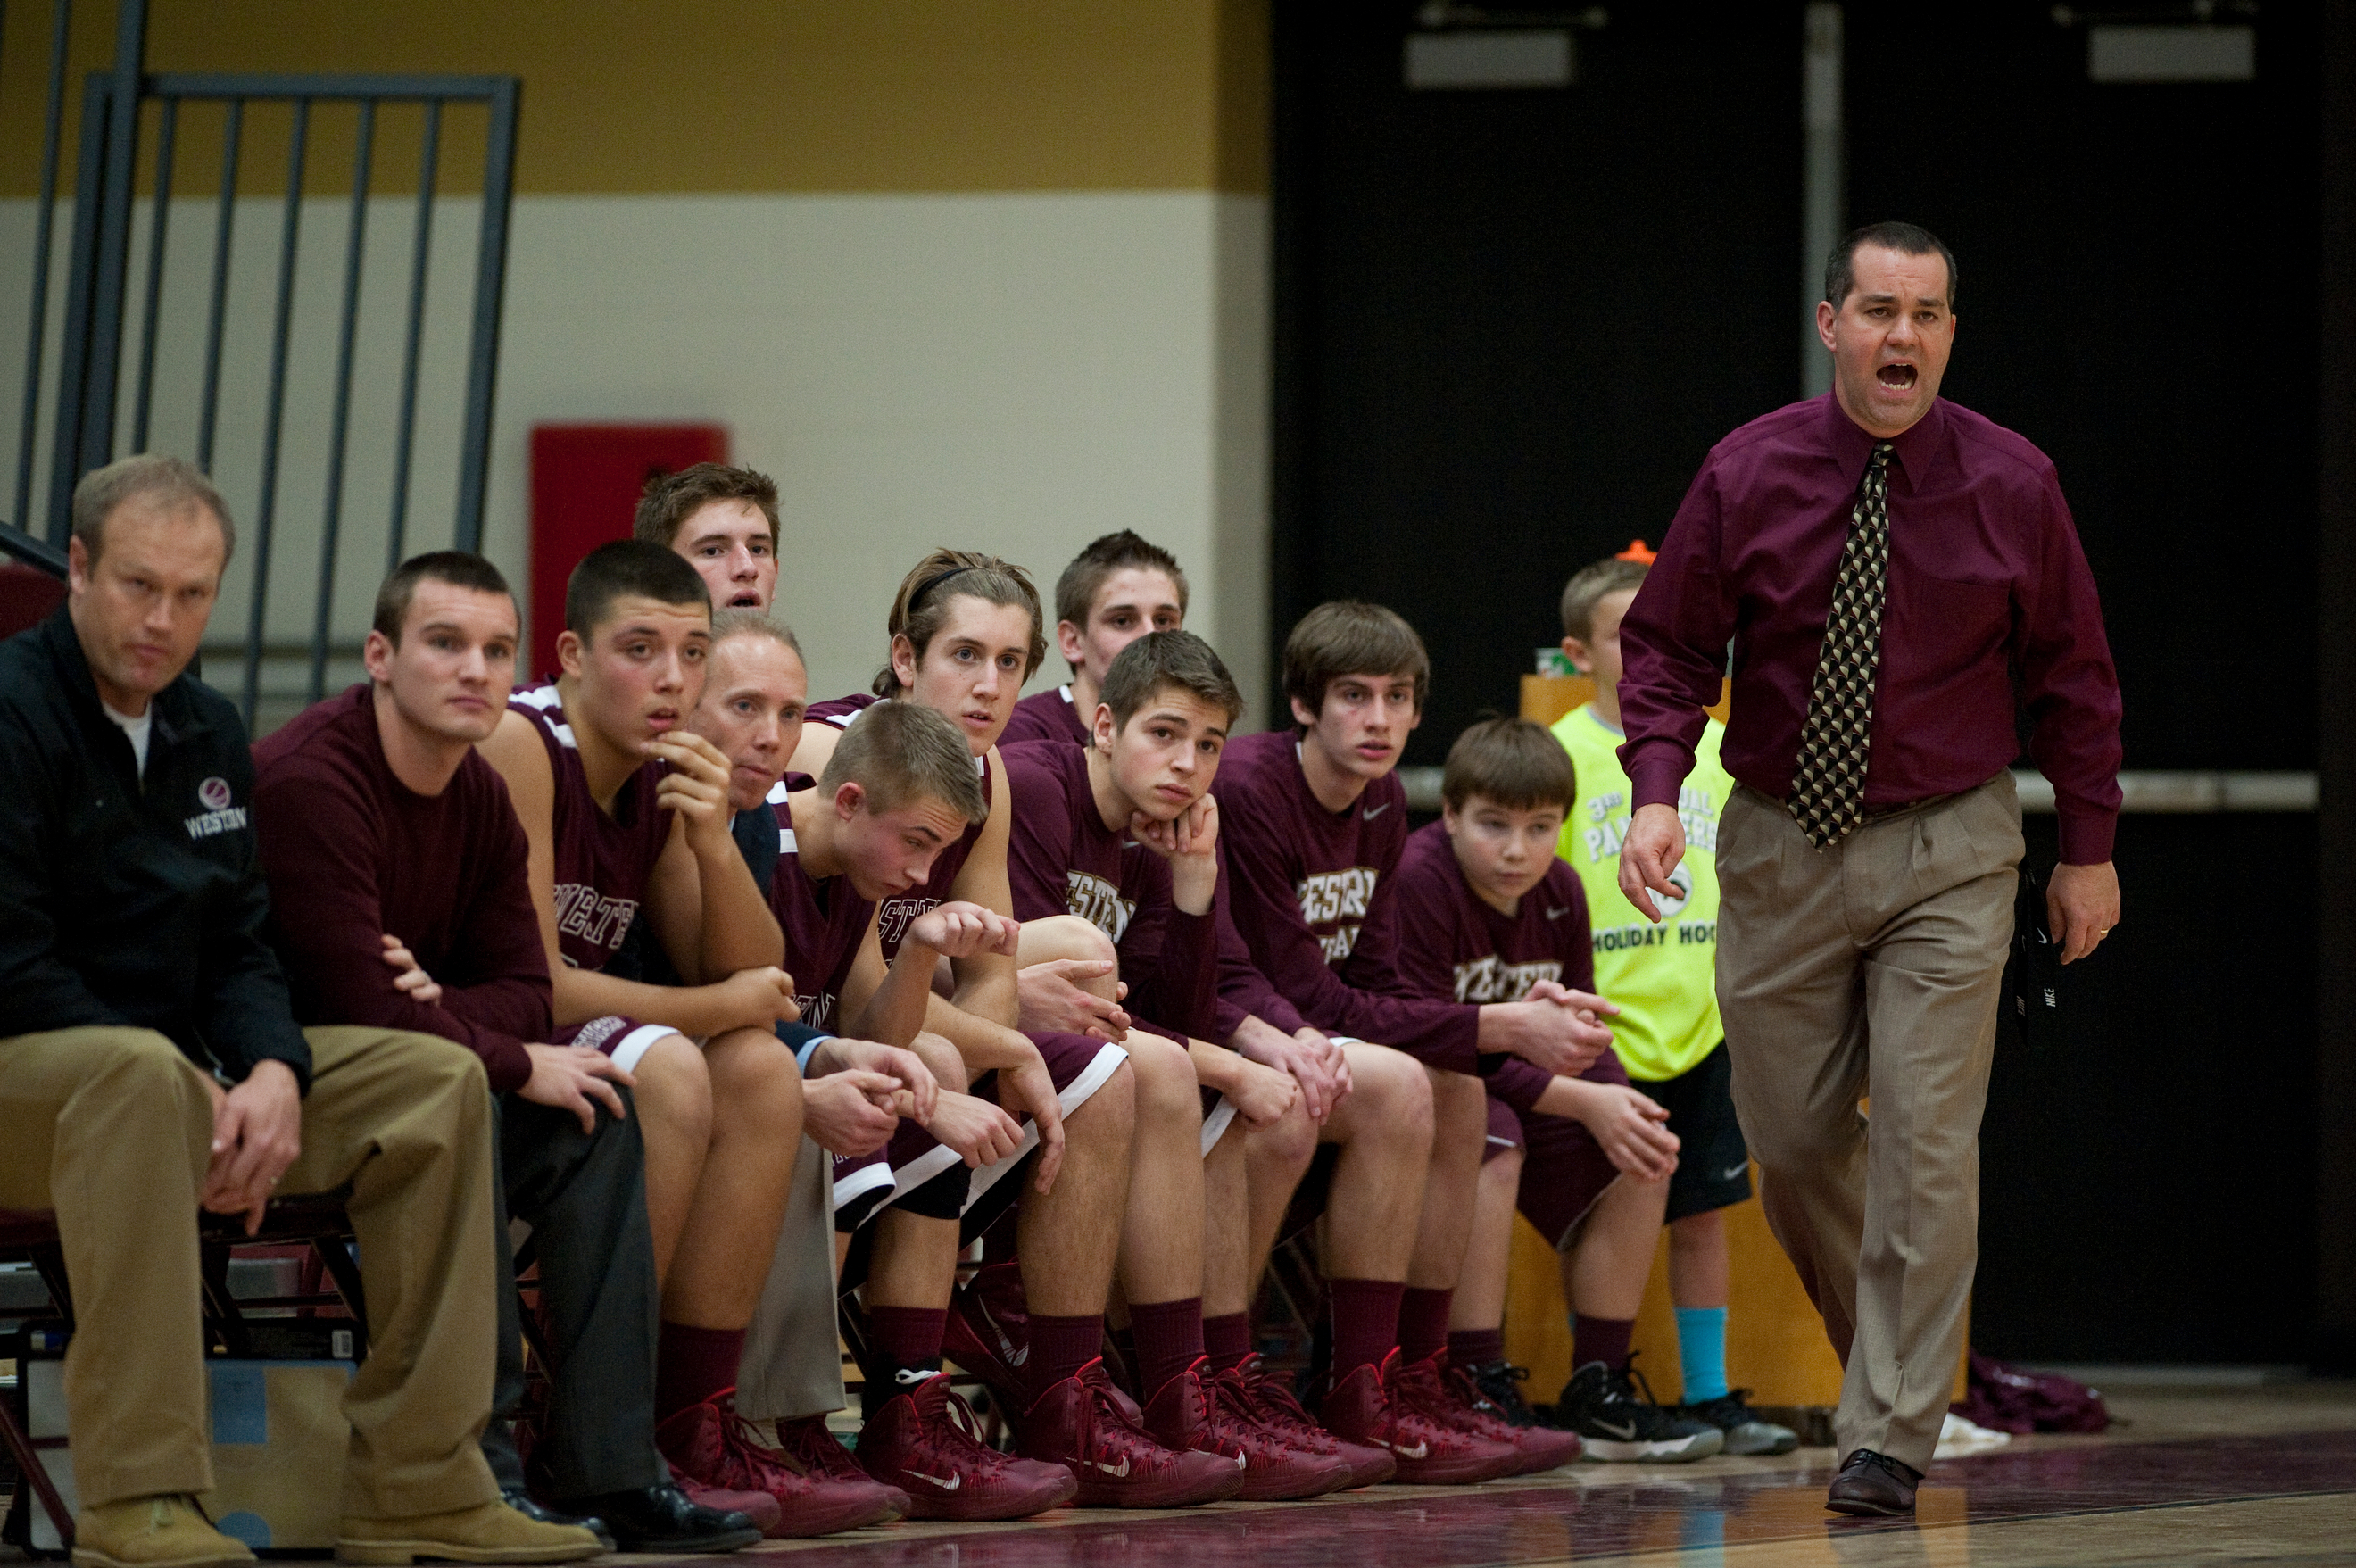 Playing for Lee Ingles, Cowan boys basketball is ready to start season